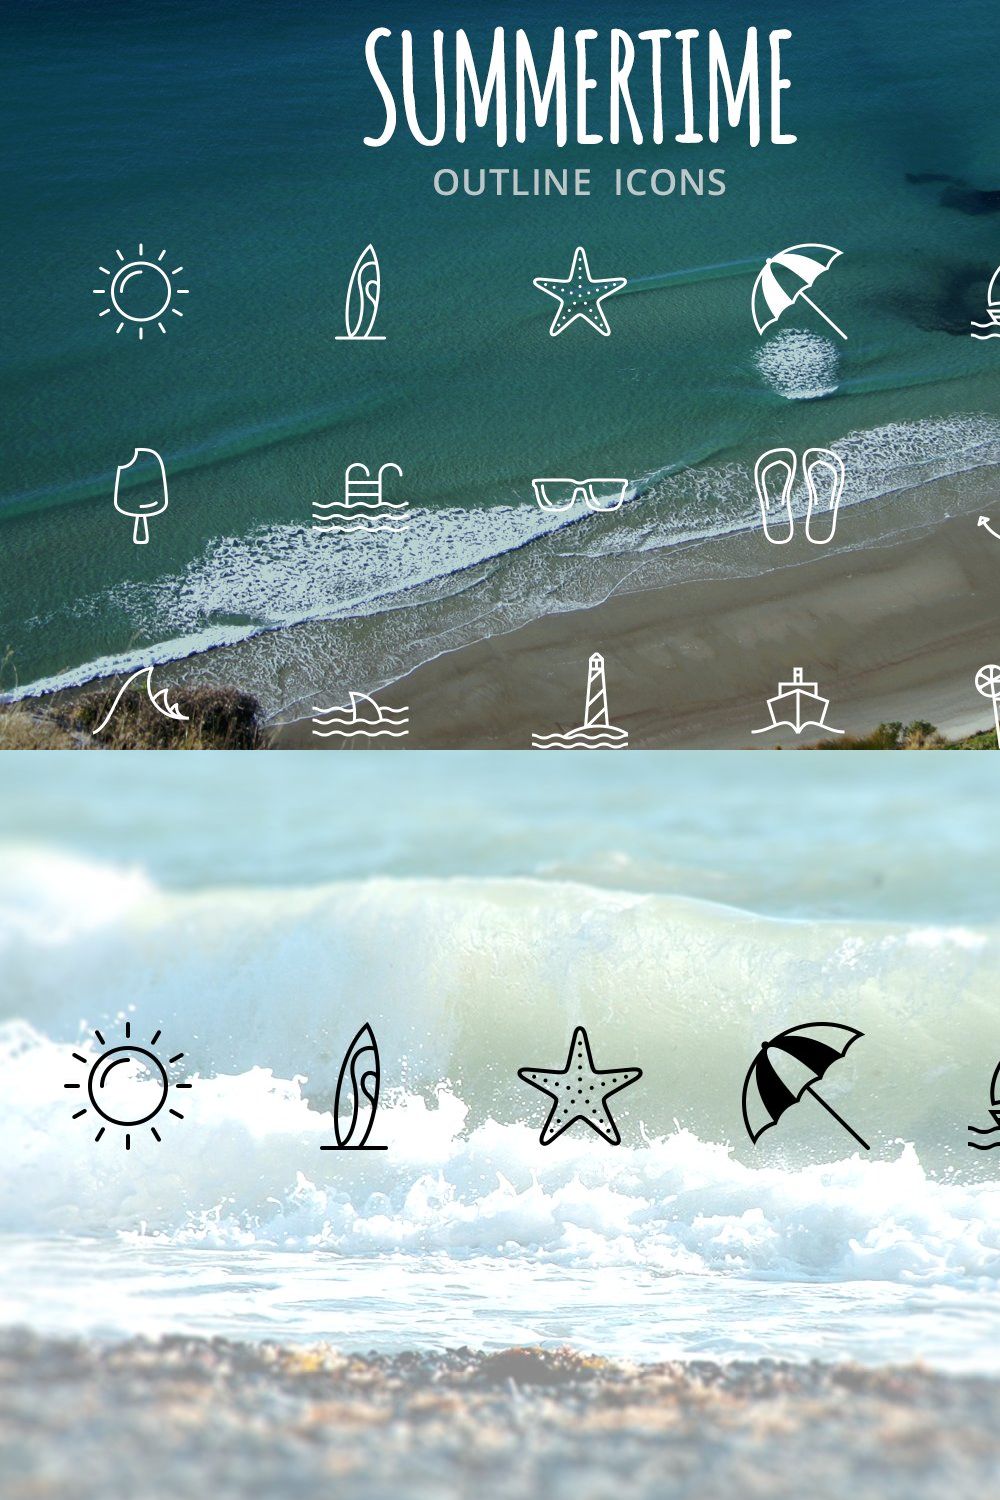 Summertime. A perfect summer iconset pinterest preview image.